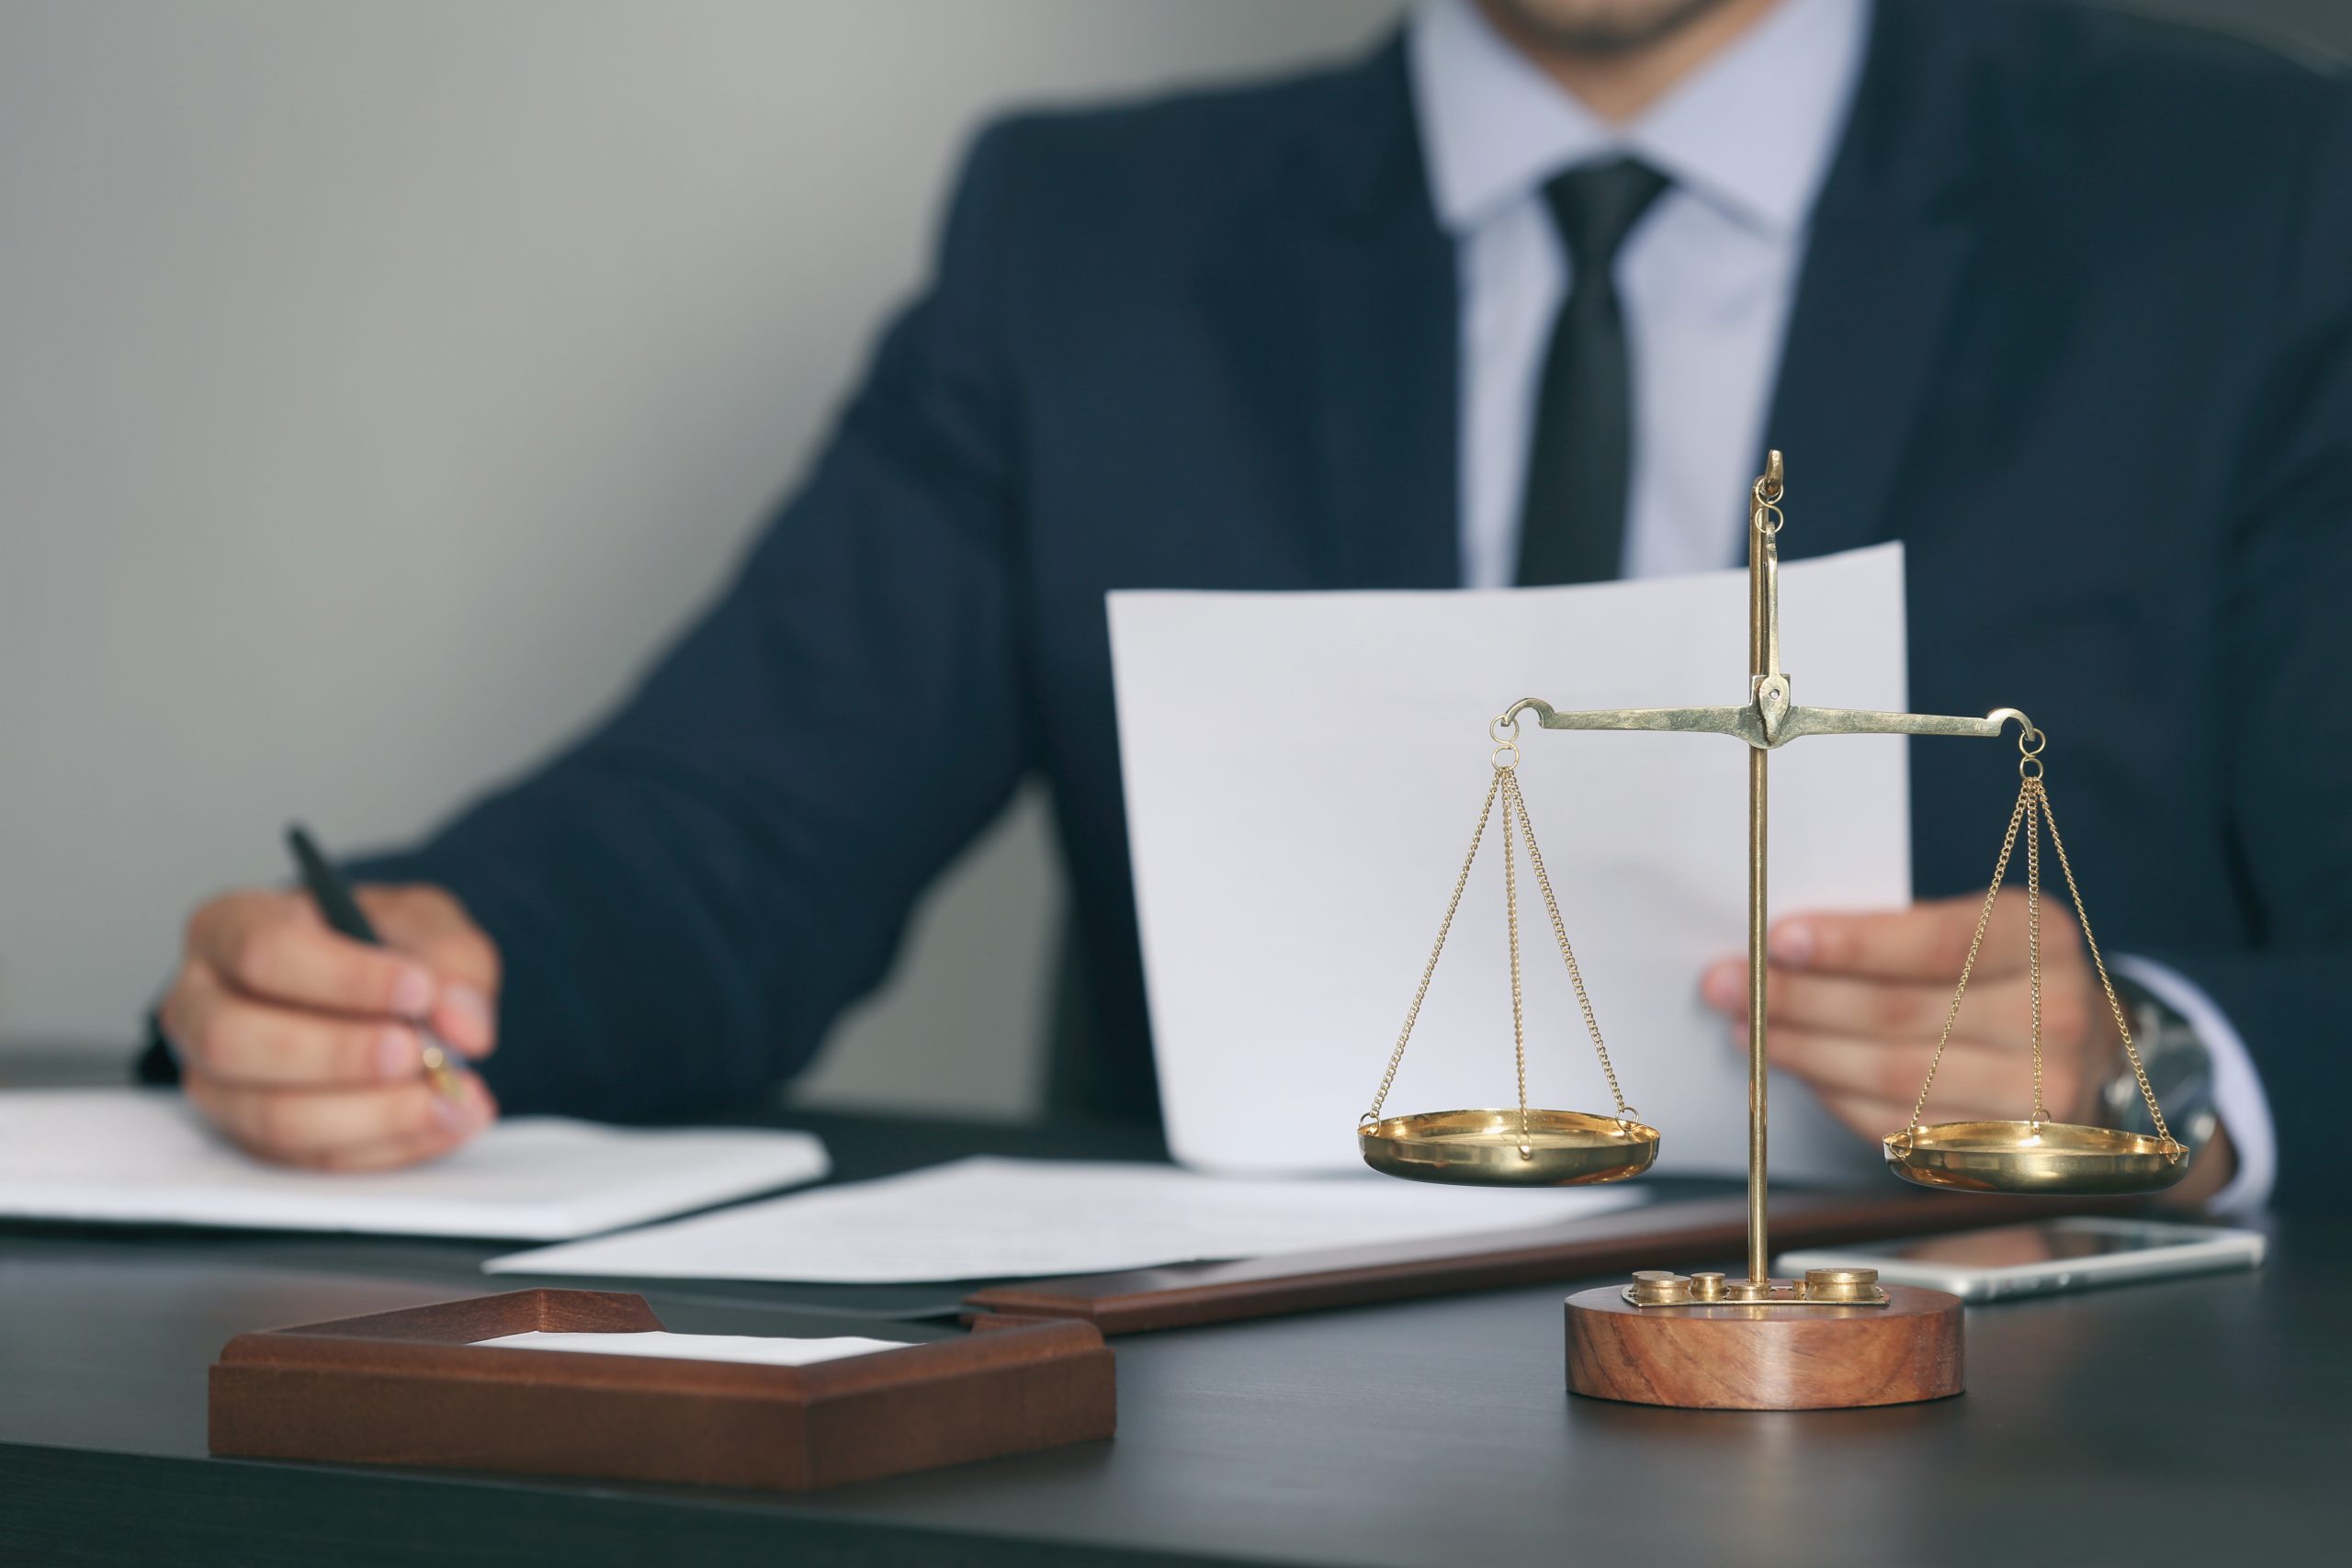 Scales of justice and businessman sitting at table